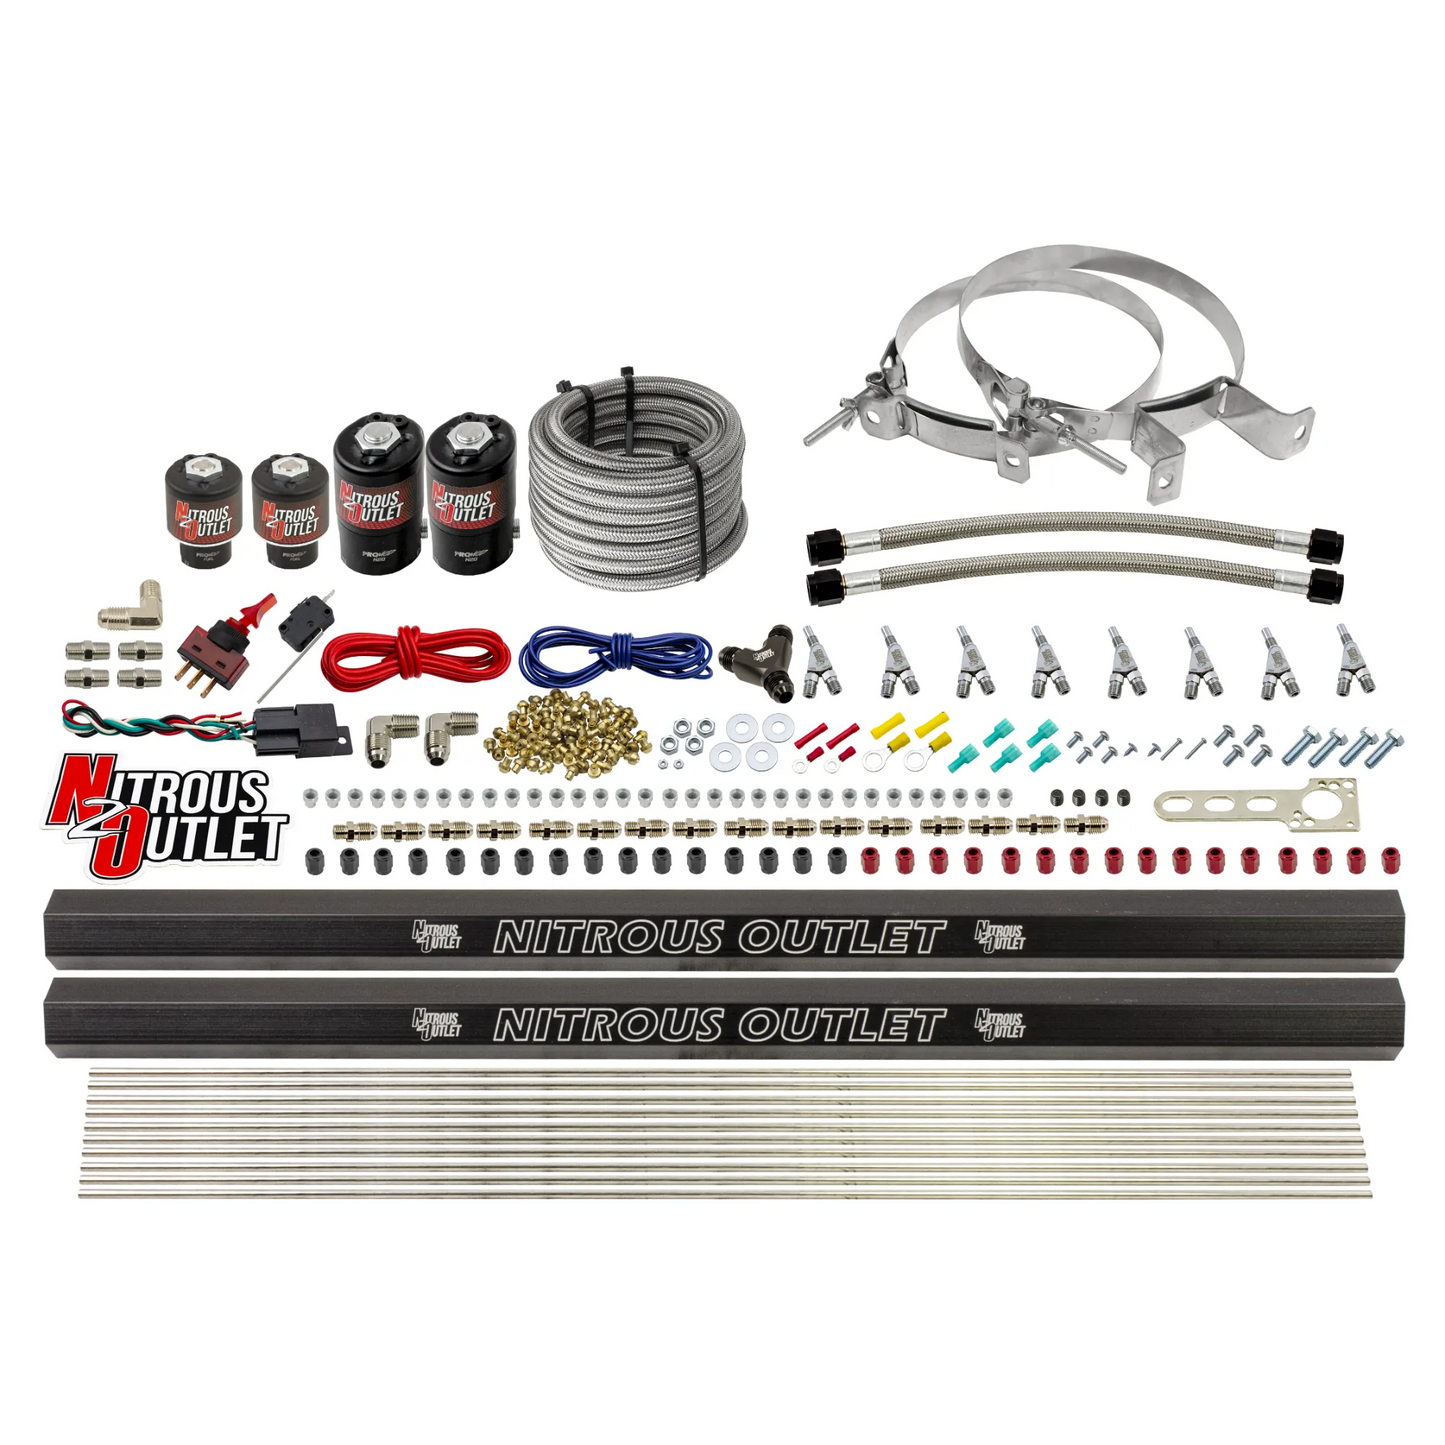 8 Cylinder Single Stage Direct Port Nitrous System with Injection Rails - Gas - .112 Nitrous/.177 Fuel - Straight Blow Through Nozzles